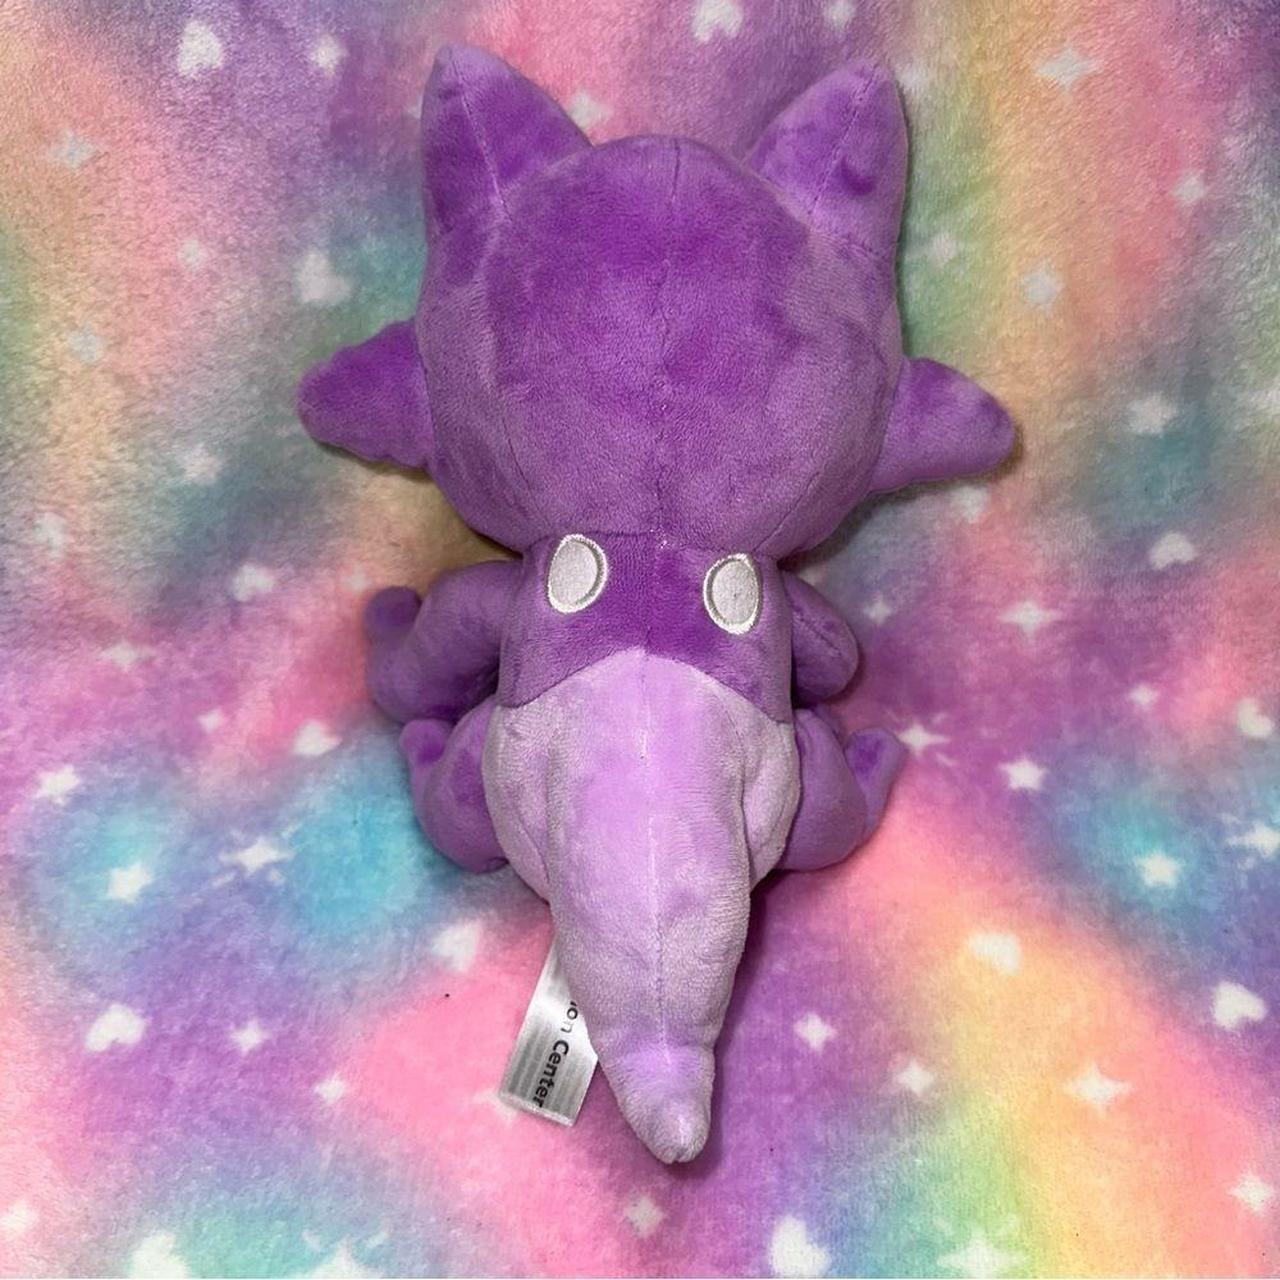 HIDDEN] Toxel Pokemon All Star Collection Plush